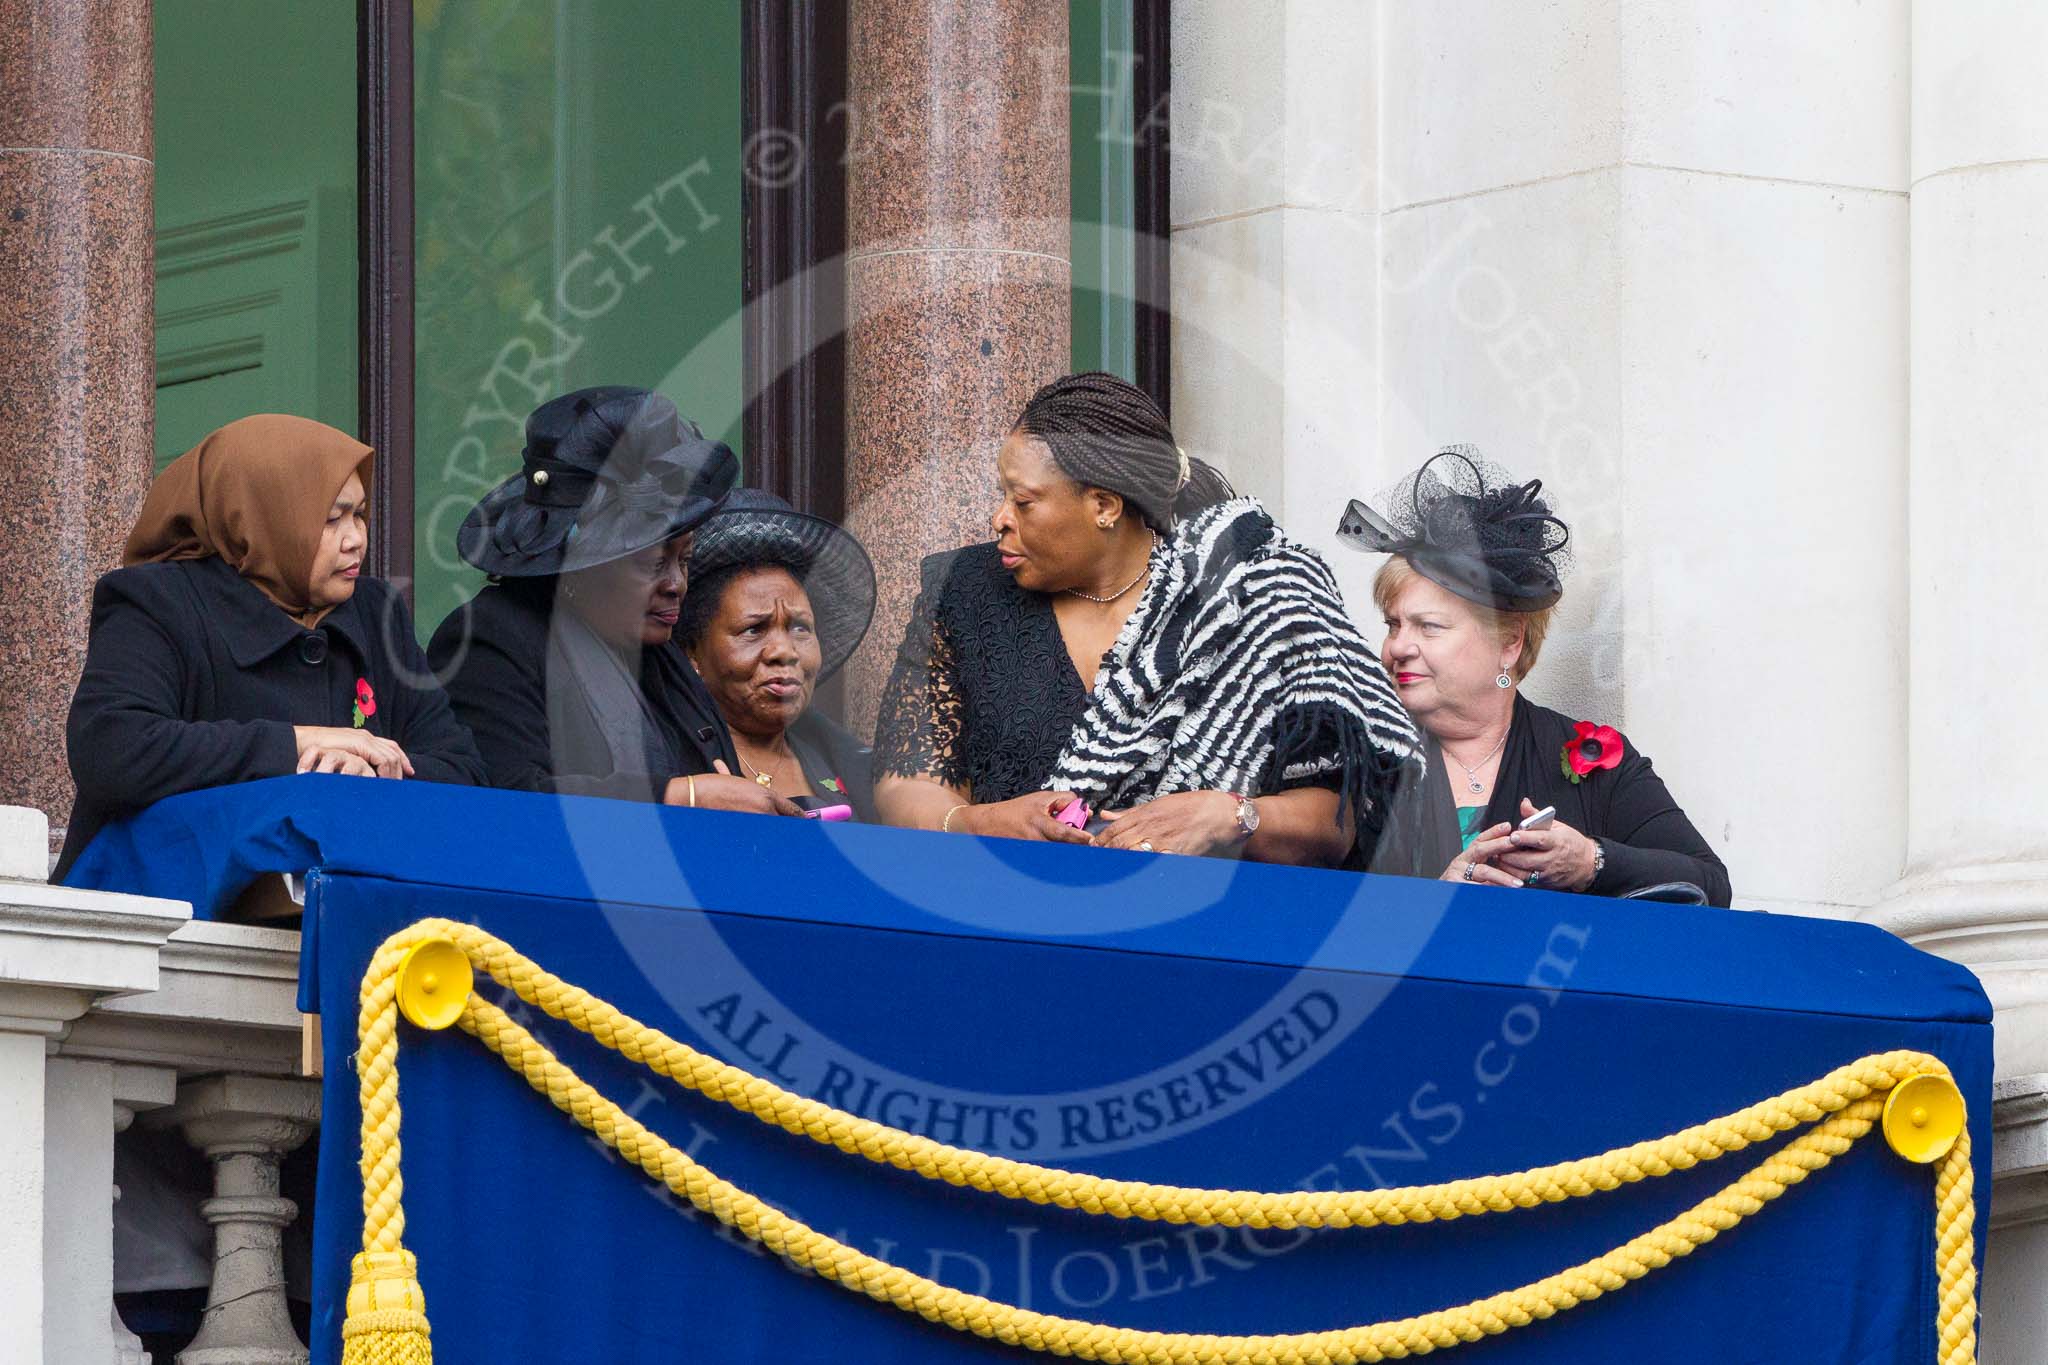 Remembrance Sunday at the Cenotaph 2015: Guests on one of the balconies of the Foreign- and Commonwealth Office Building. Image #40, 08 November 2015 10:19 Whitehall, London, UK